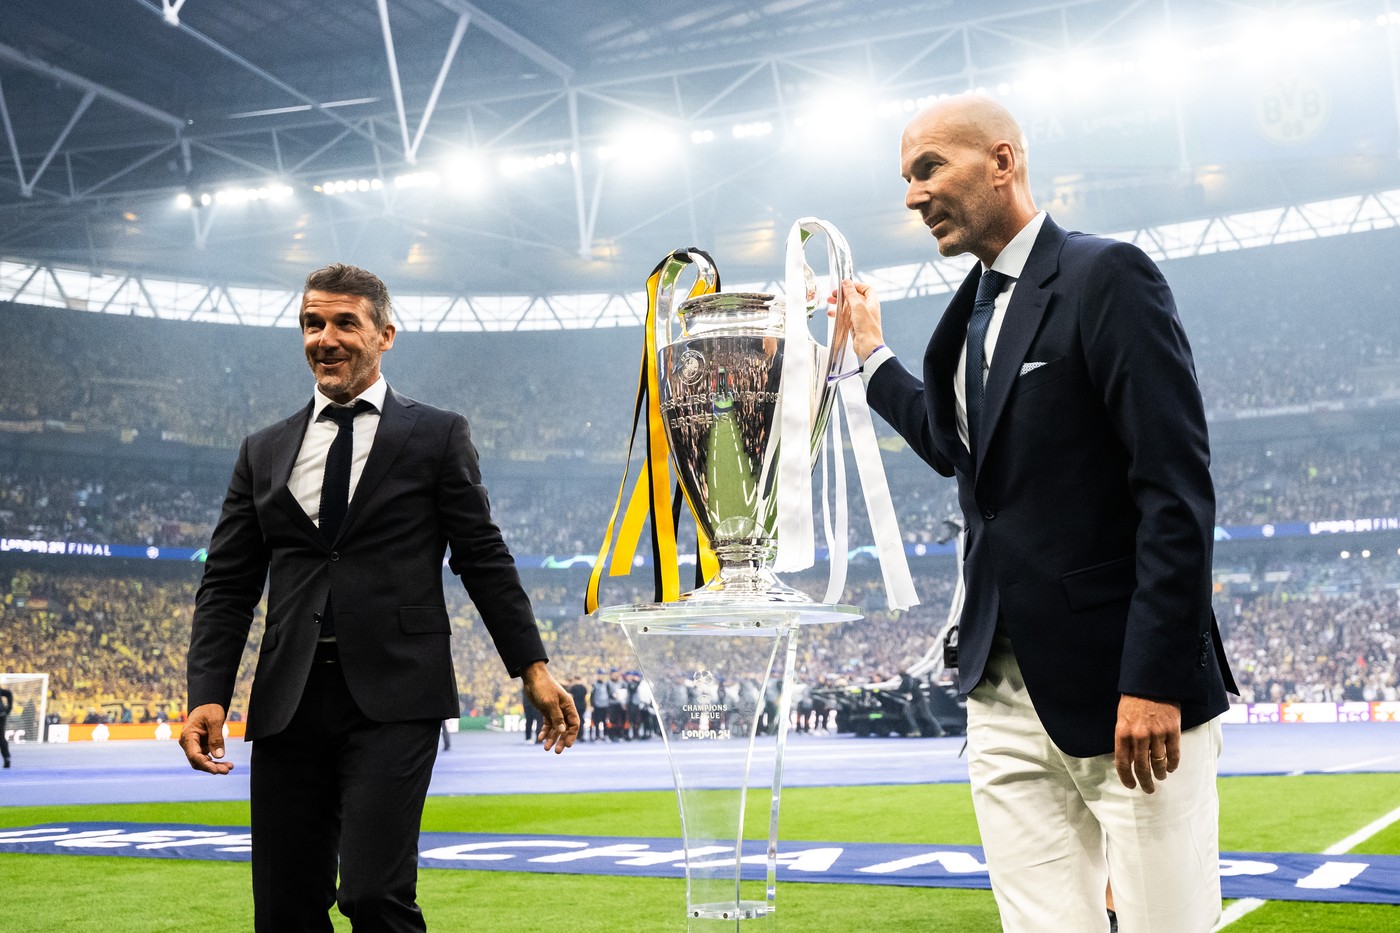 240601 Former players Karl Heinz Riedle and Zinedine Zidane carry the Champions League trophy onto the pitch ahead of the UEFA Champions League final between Dortmund and Real Madrid on June 1, 2024 in London. 
Photo: Petter Arvidson / BILDBYRĹN / kod PA / PA0818
fotboll football soccer fotball champions league final dortmund real madrid bbeng,Image: 878175668, License: Rights-managed, Restrictions: *** World Rights Except Austria, Denmark, Finland, Norway, and  Sweden *** AUTOUT DNKOUT FINOUT NOROUT SWEOUT, Model Release: no